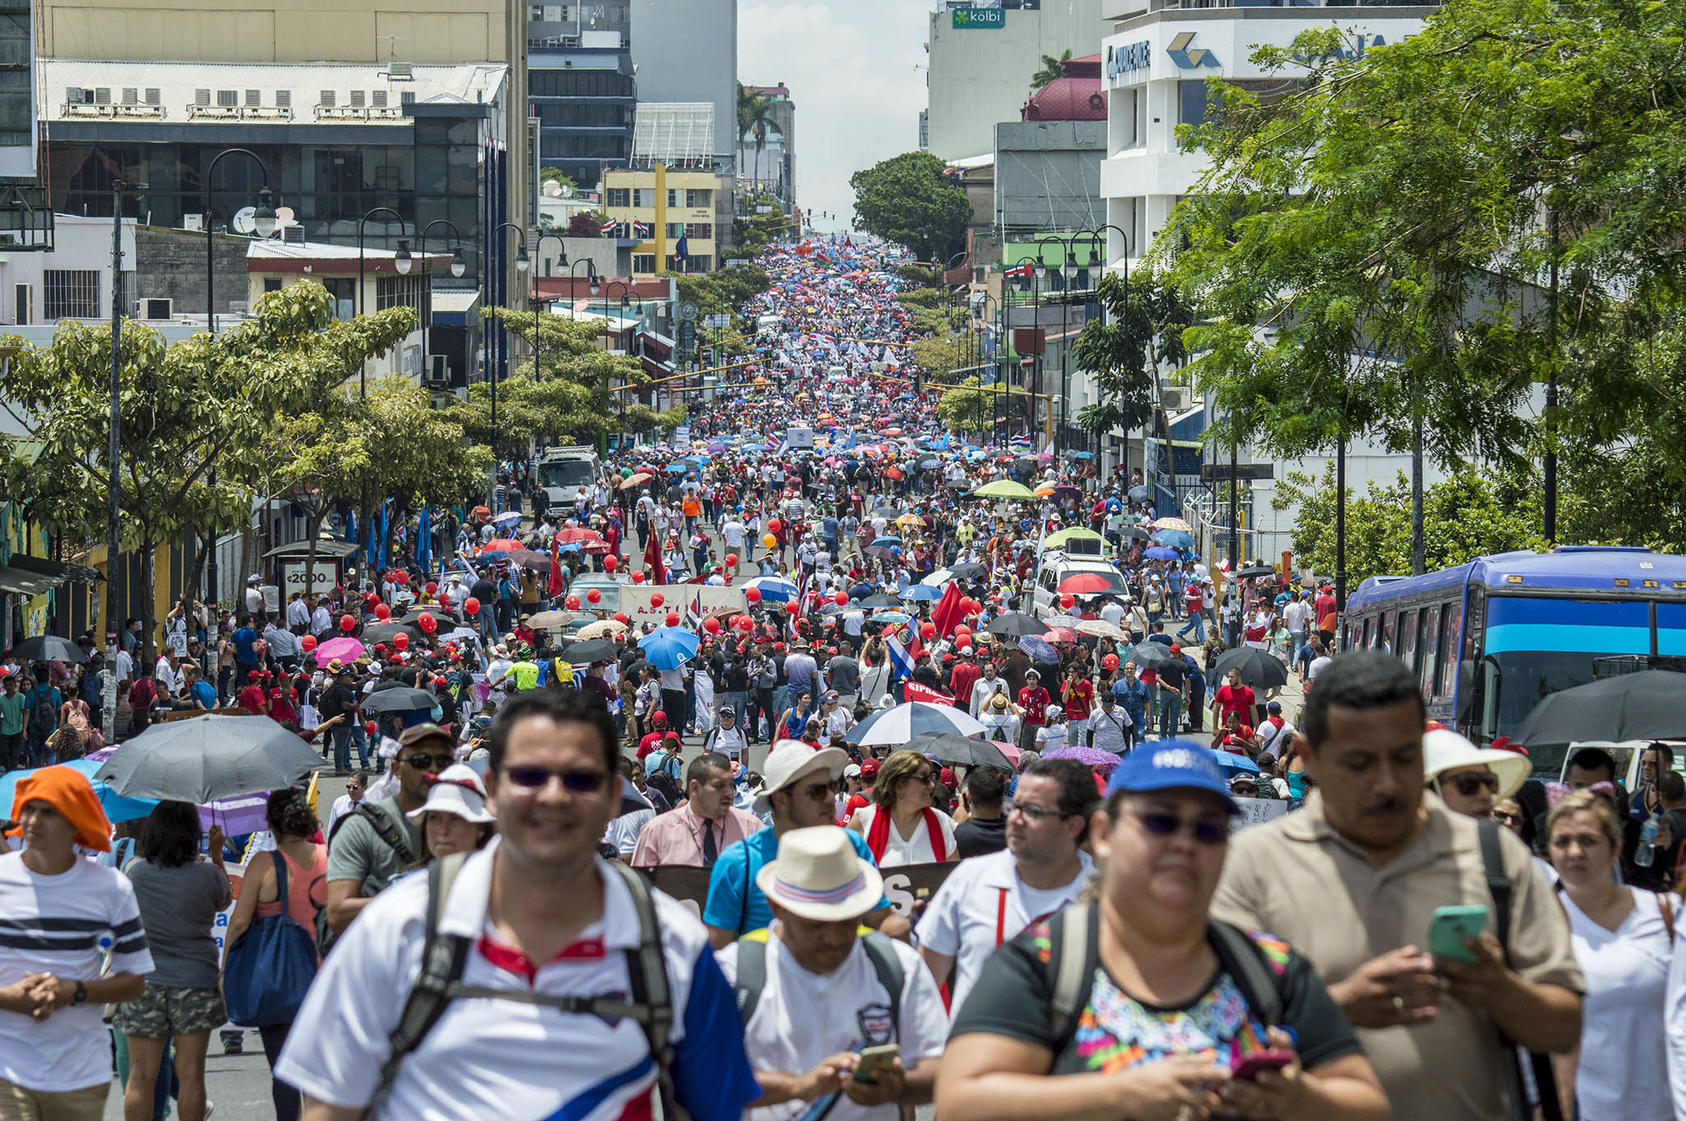 Costa Rican trade unions protest a tax reform bill, Sept. 26, 2018. Costa Rica has a long history of democratic stability and is a key partner for Washington in the Western Hemisphere. (Luis Manuel Madrigal Mena/Wikimedia Commons)